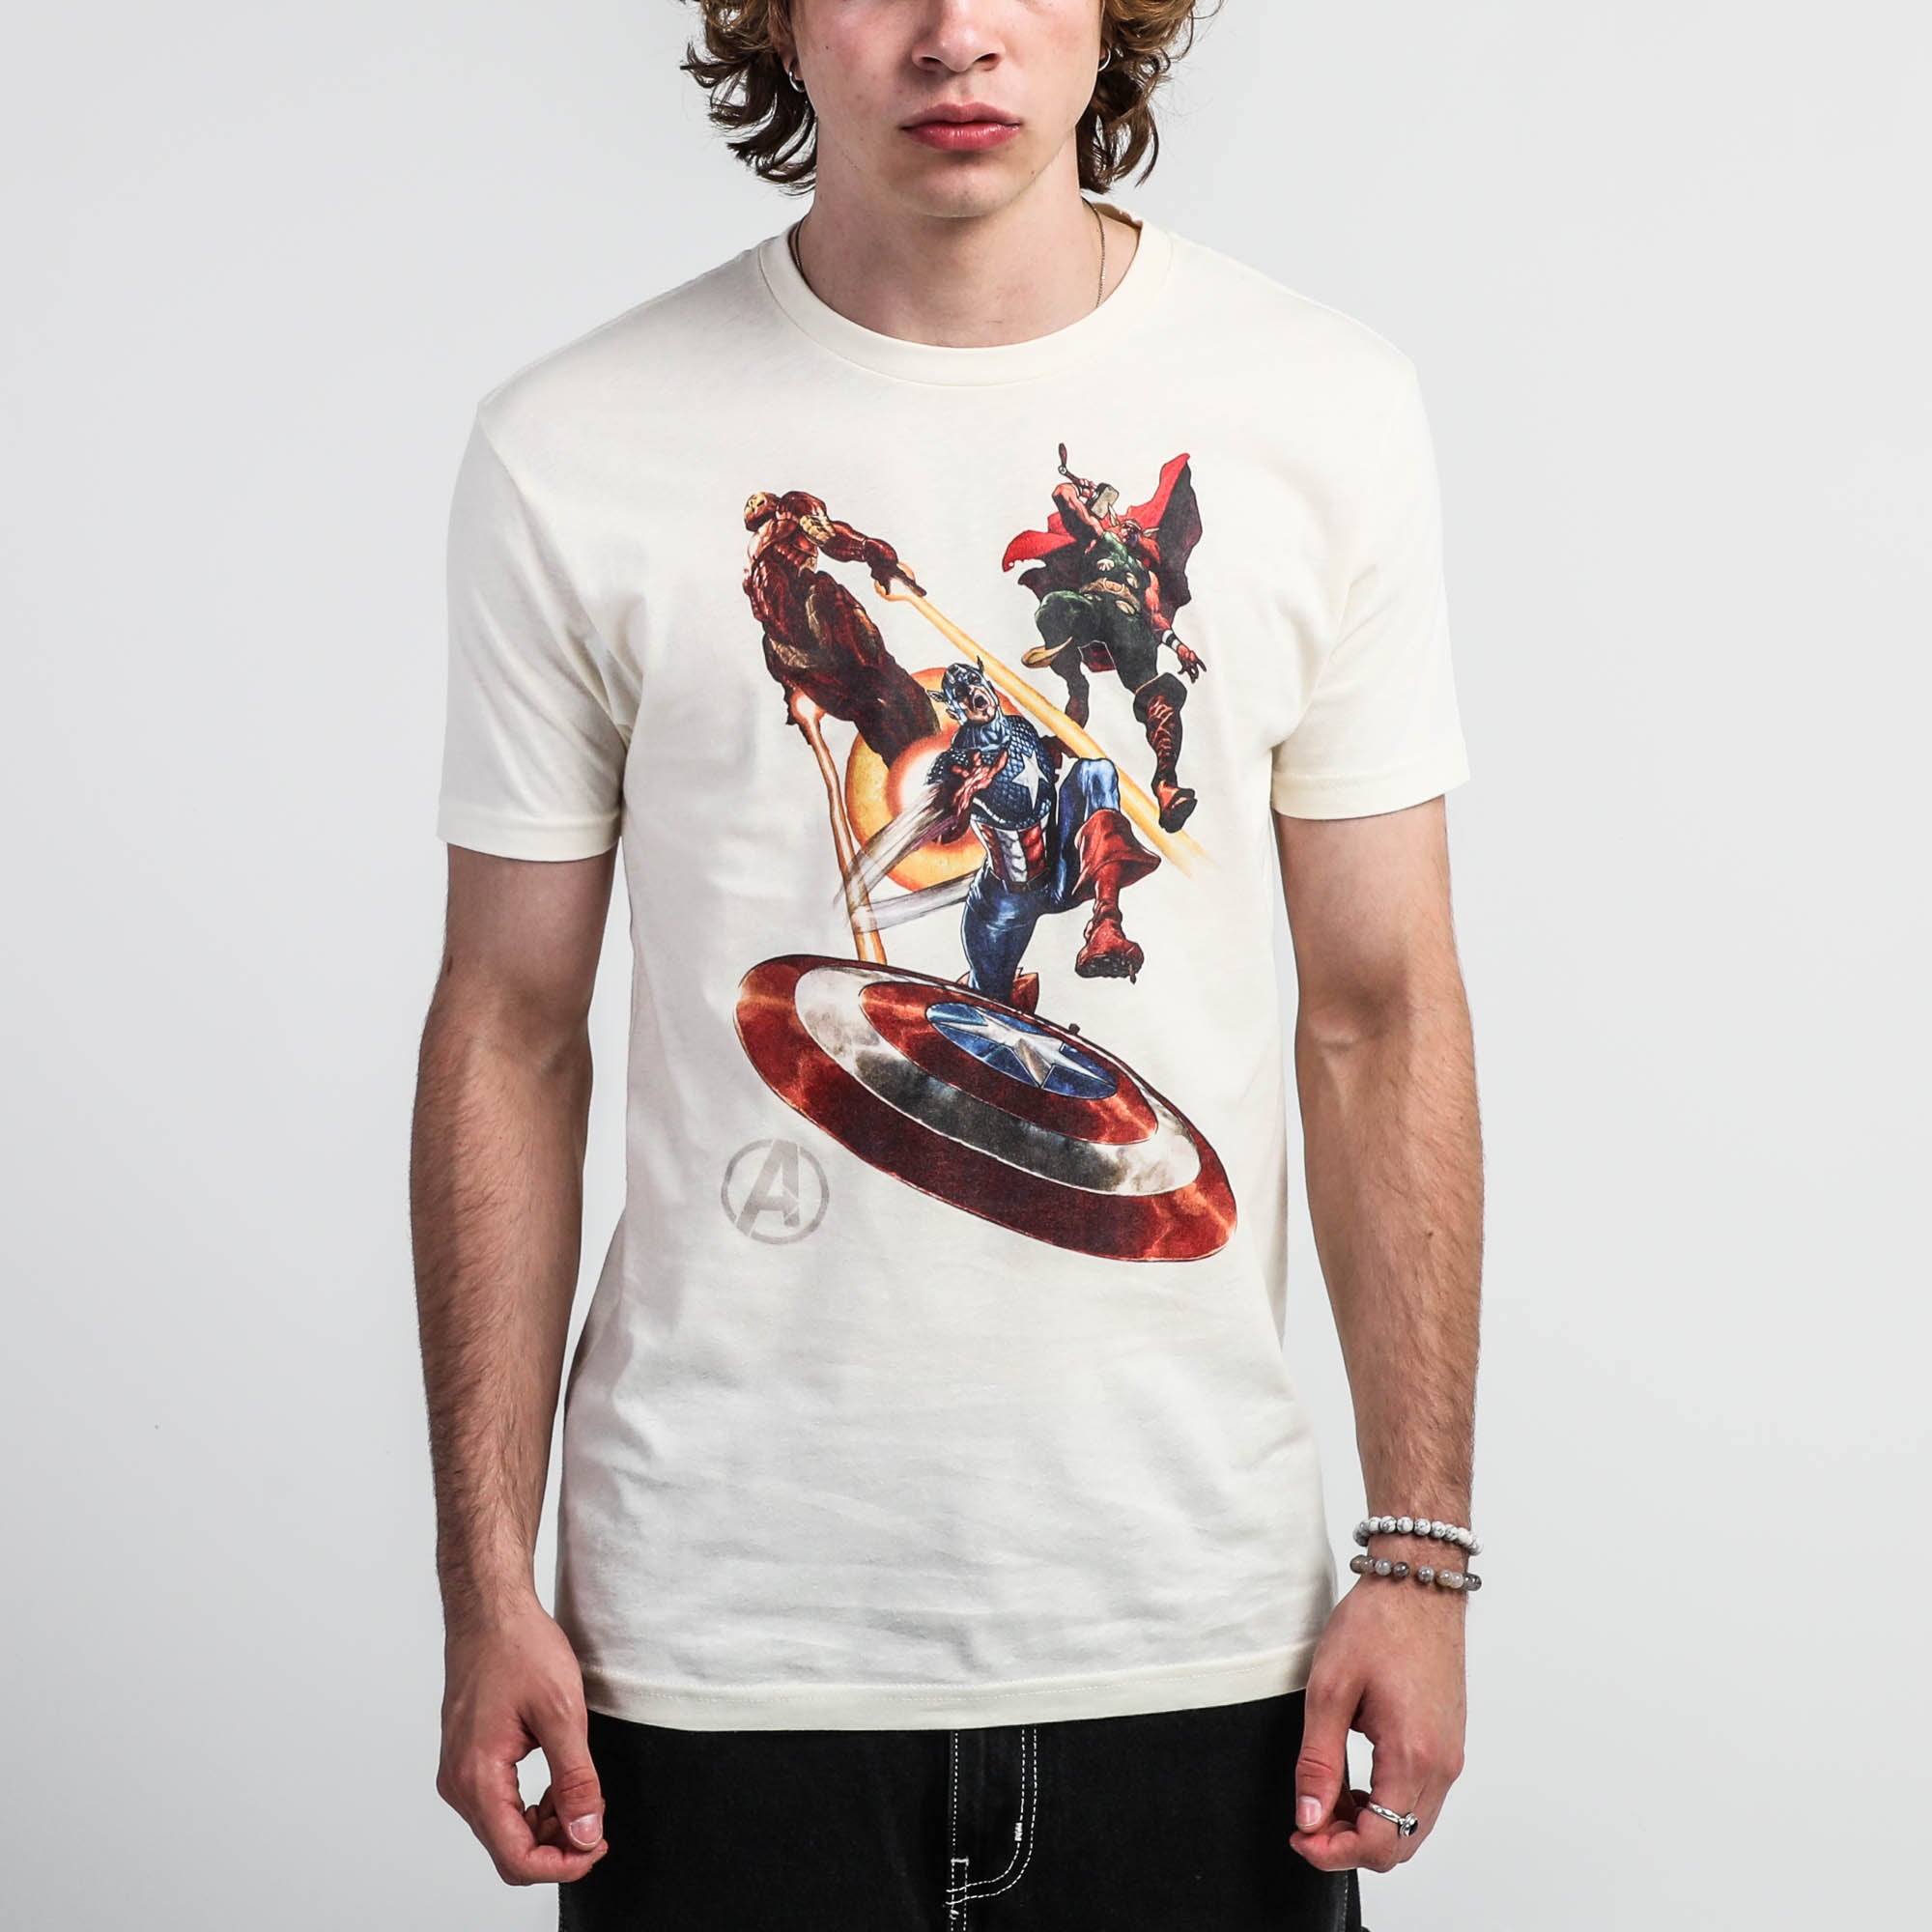 | Accessories & Heroes Marvel Thor Apparel Natural Iron Tee Villains™ & | Captain Man, - America, Marvel Official